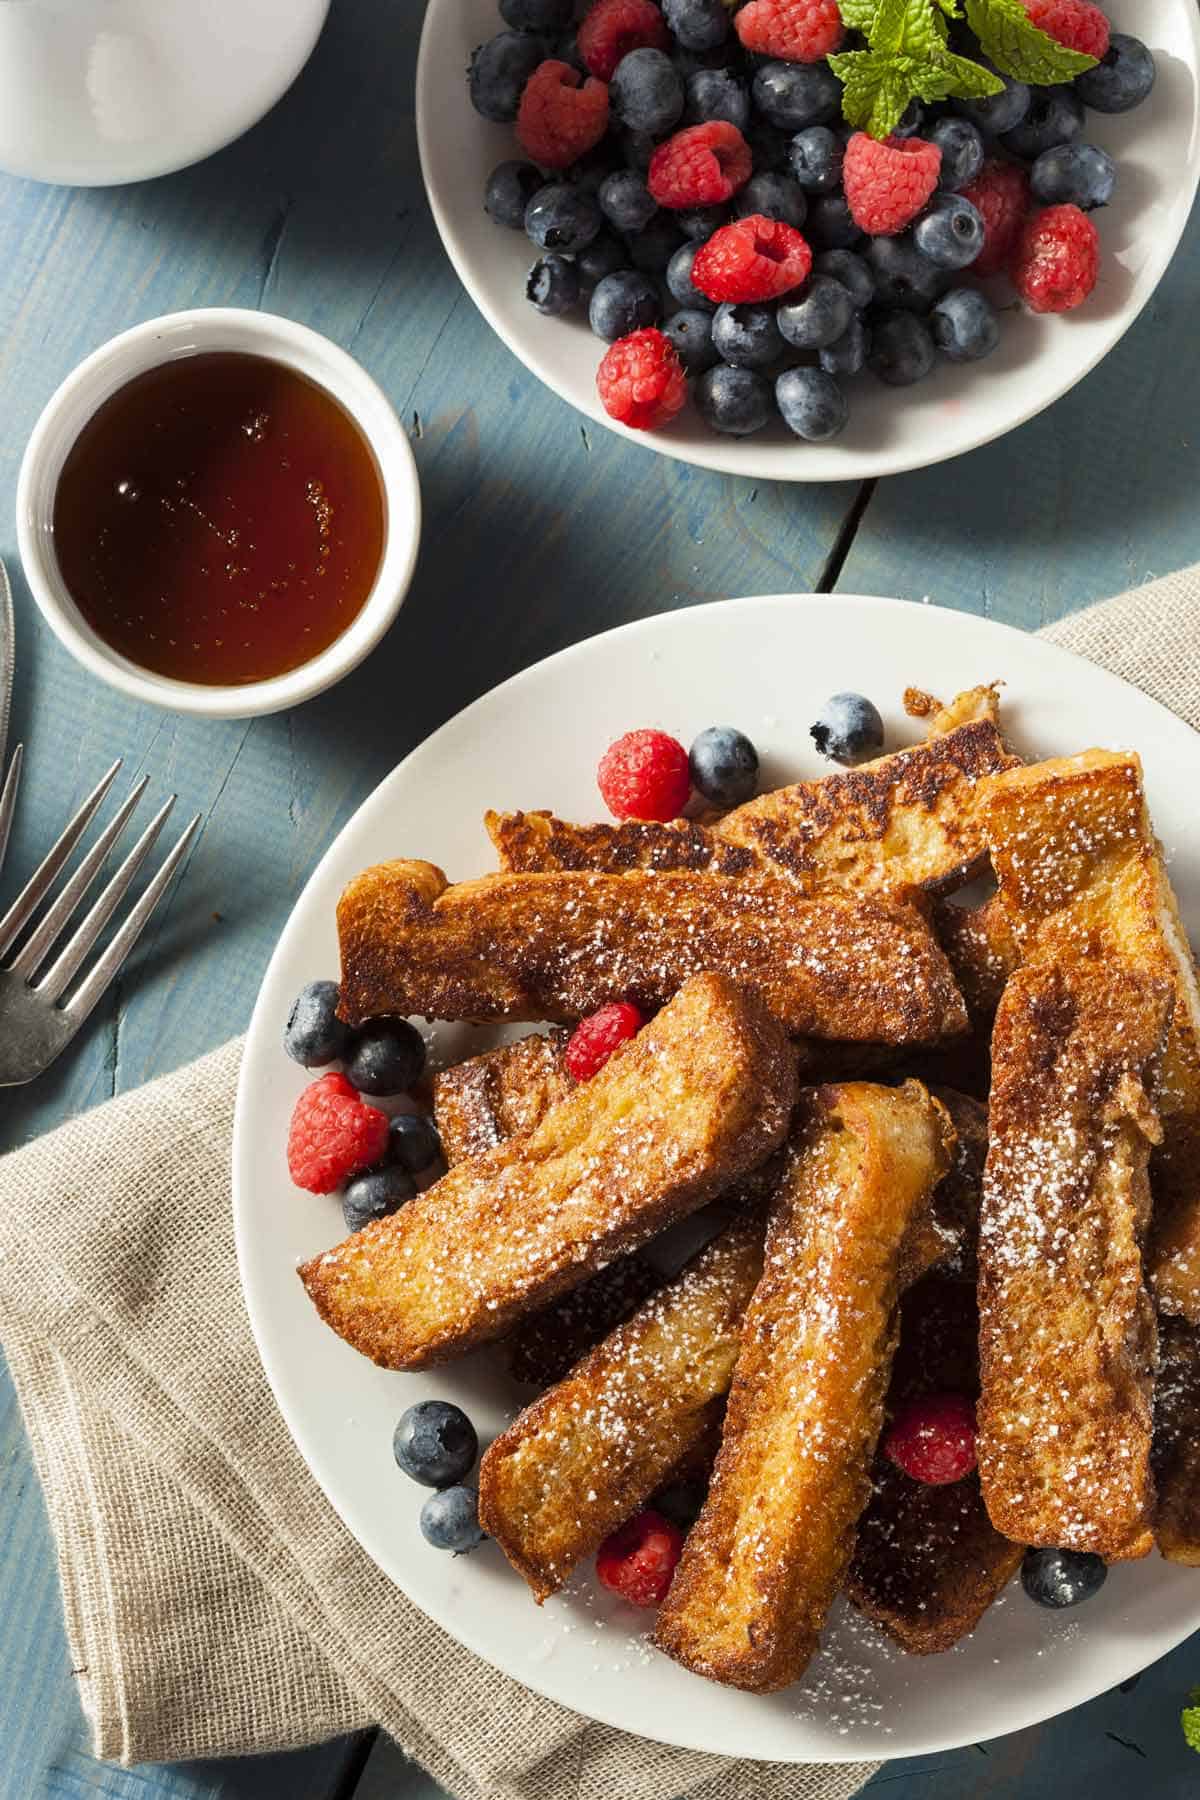 Plate of French toast sticks garnished wtih fresh berries and powdered sugar. Plate of berry fruit salad and small bowl of syrup is in the background.